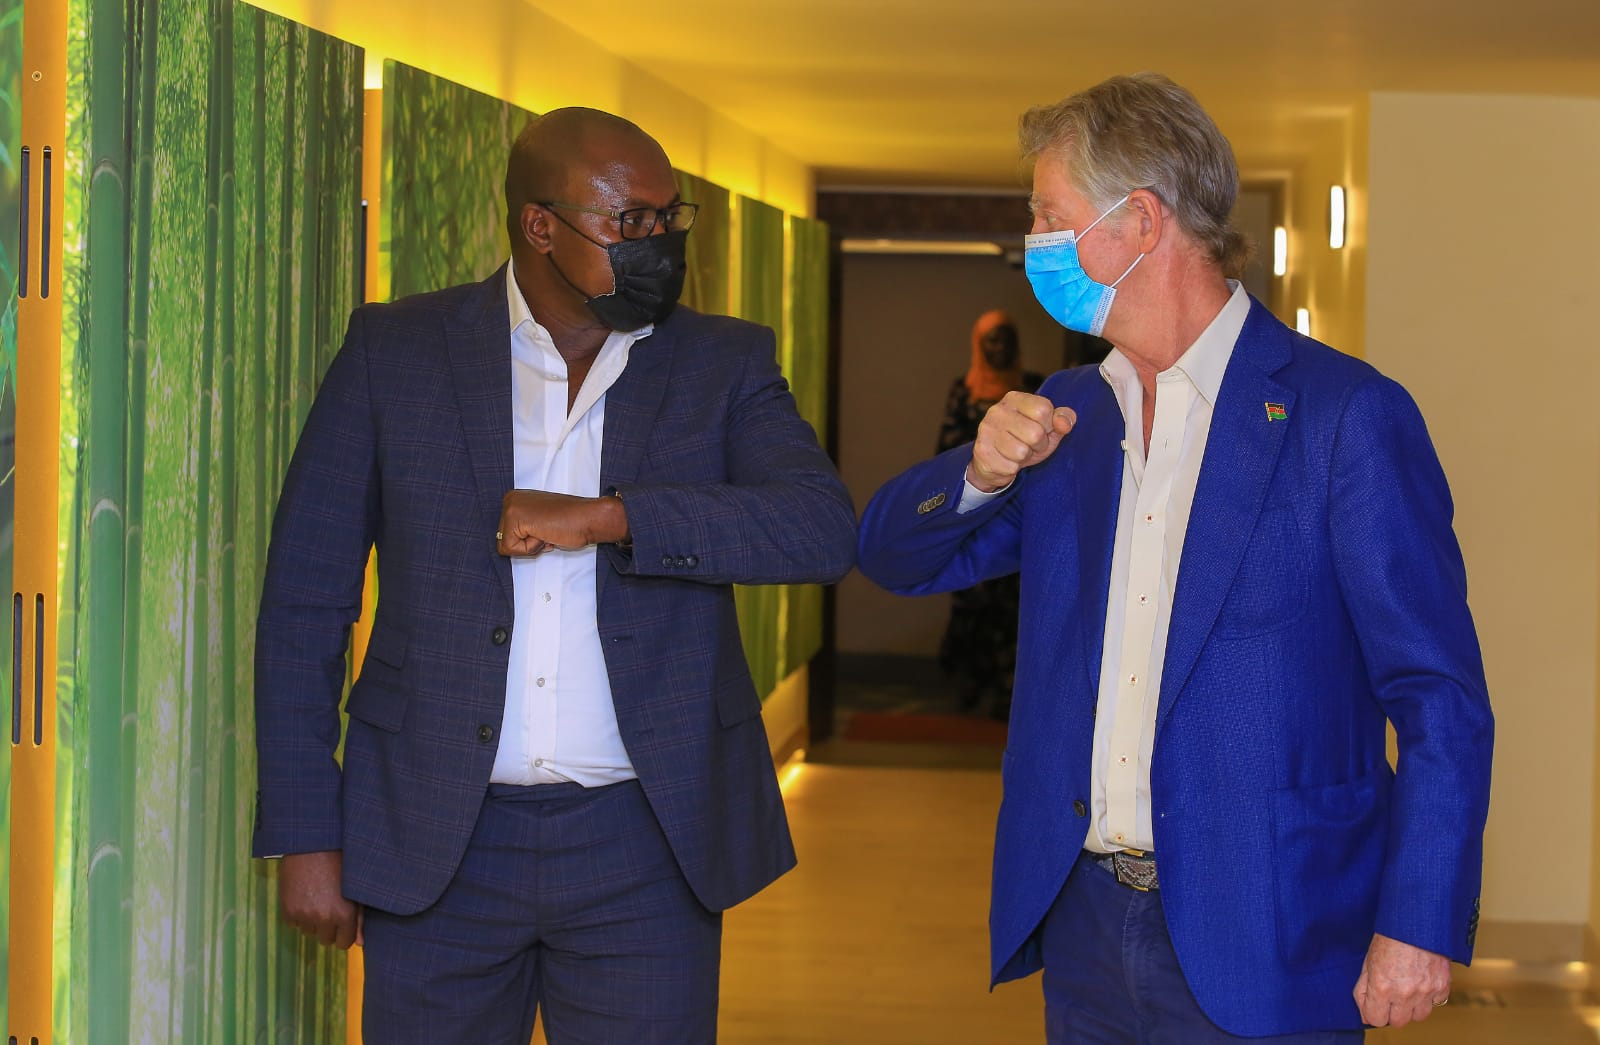 ATTA president Nigel Vere Nicoll and Kenya Tourism Federation chairman Fred Odek during the forum